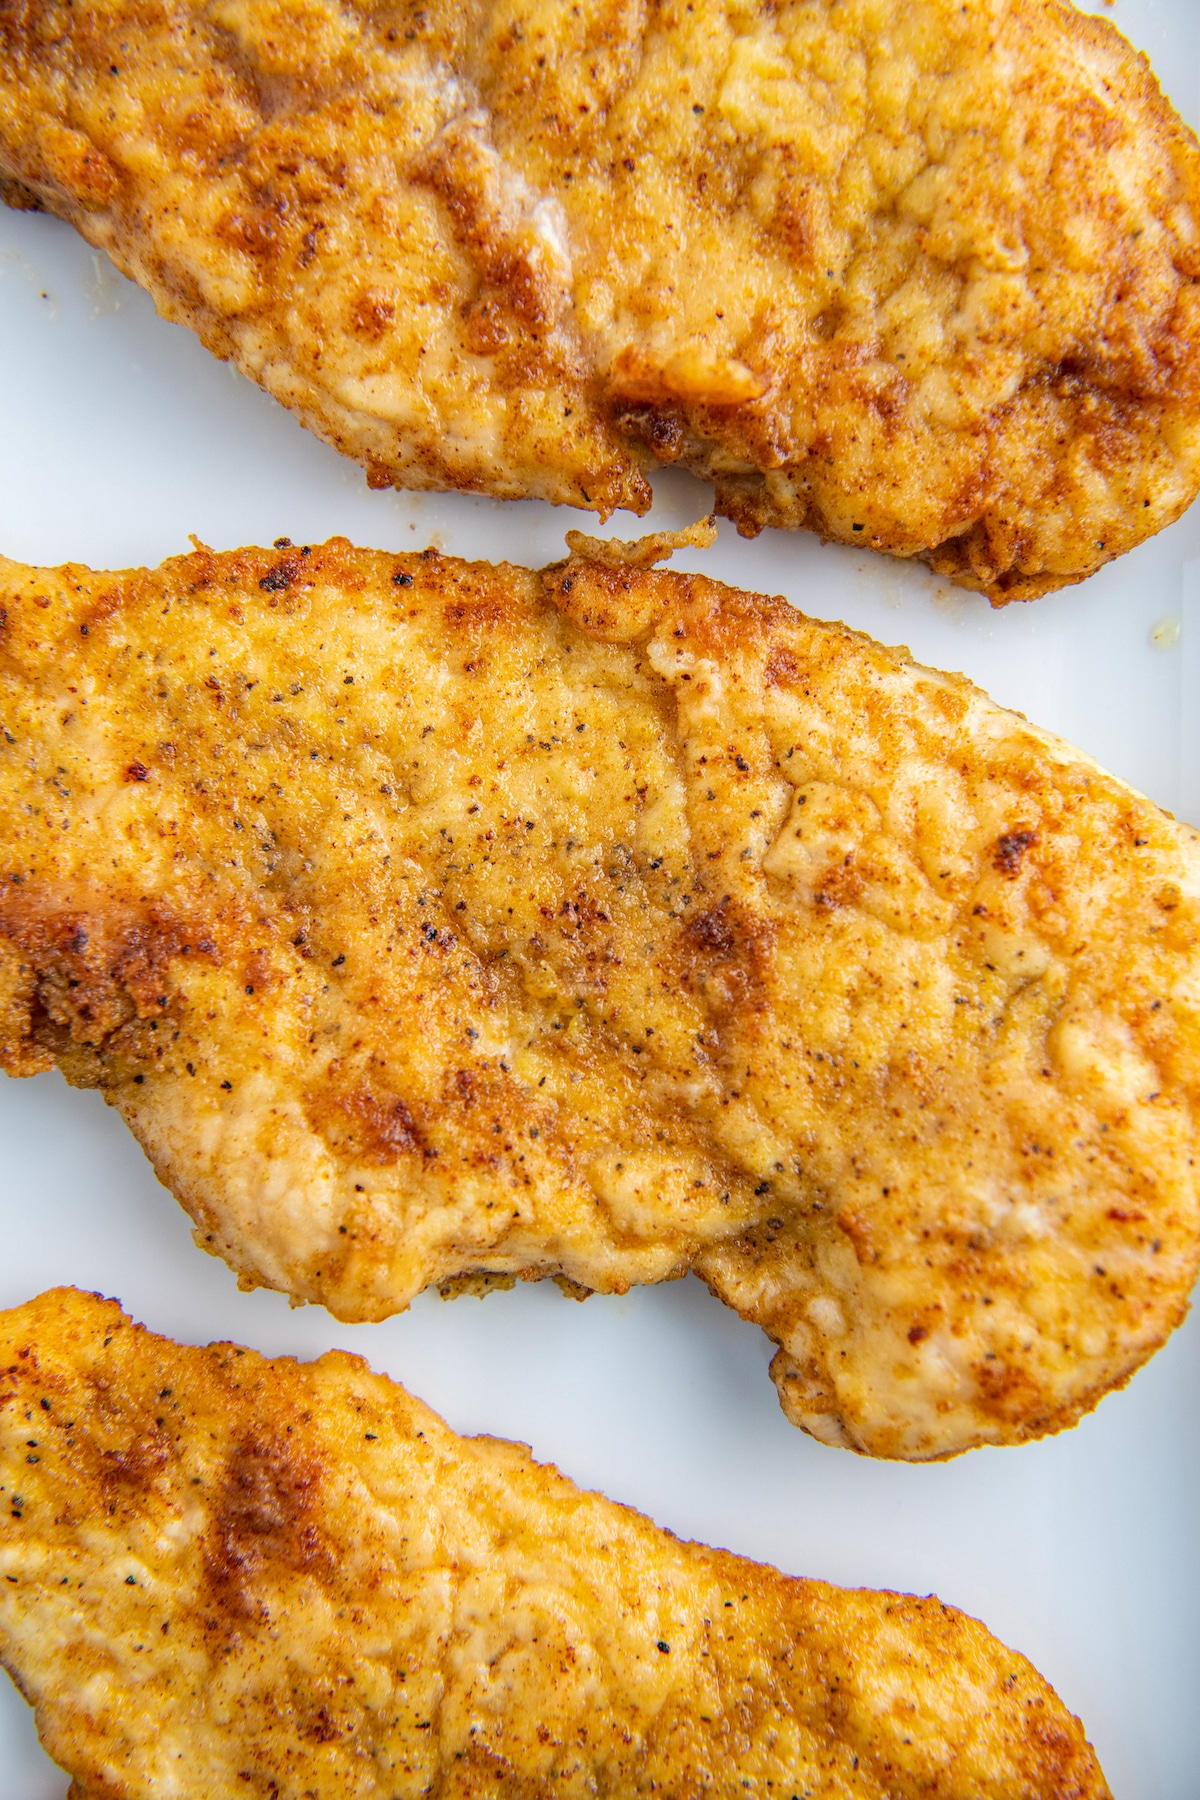 Pan fried chicken breasts on a white plate.